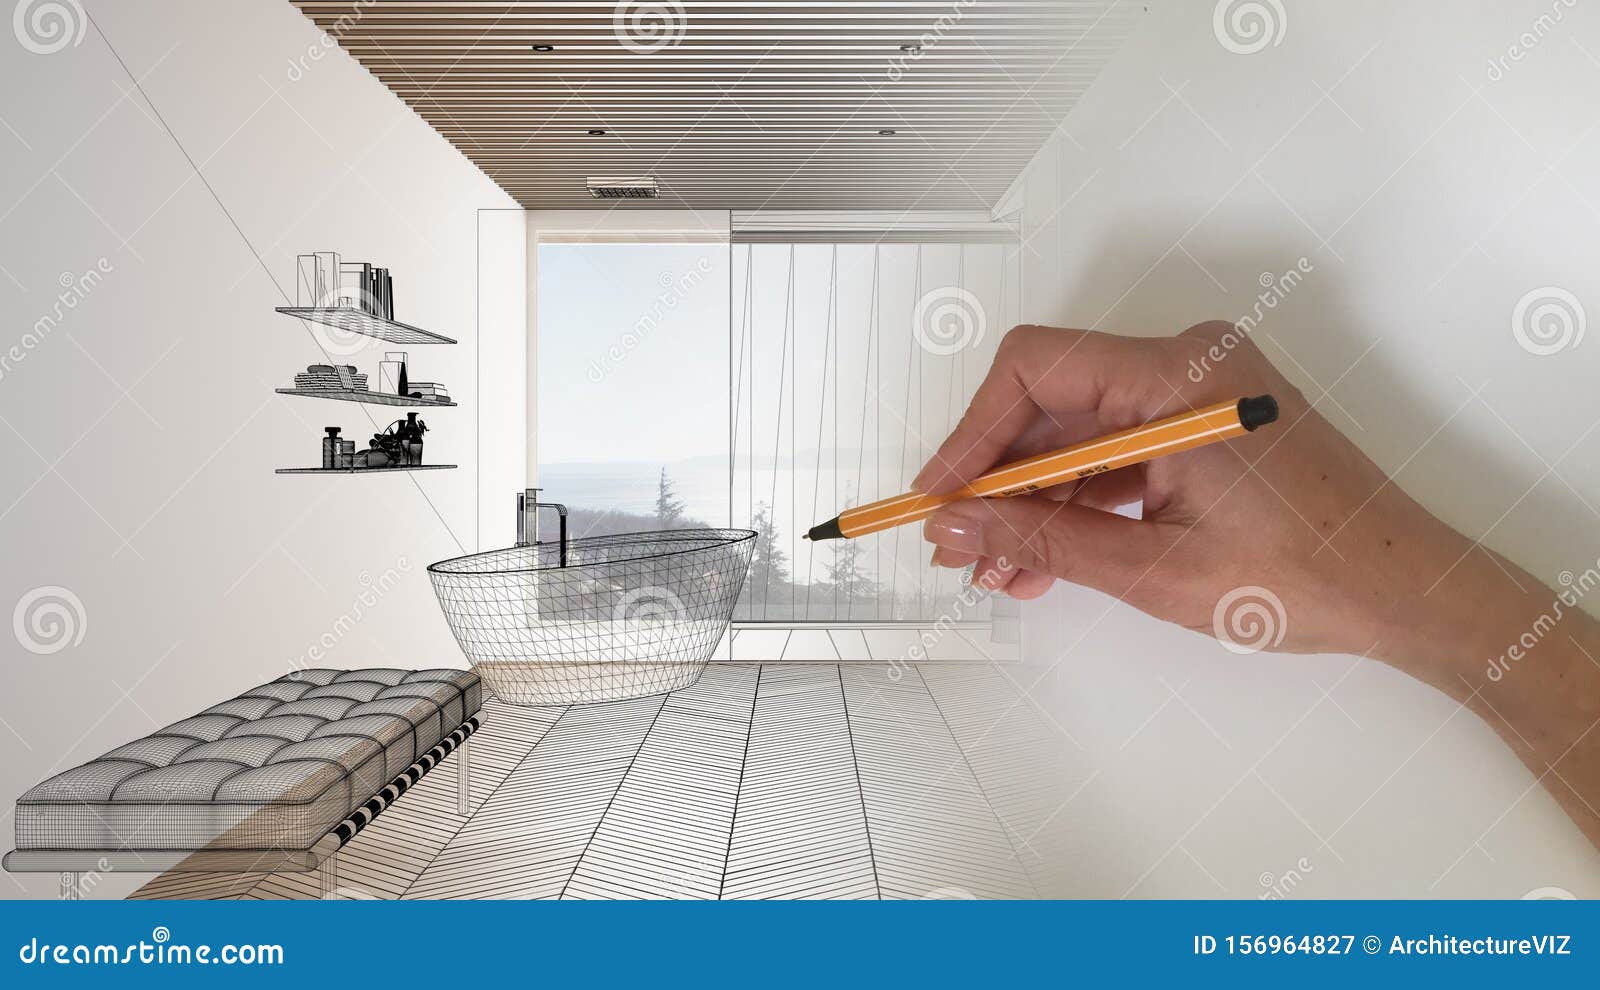 Architect Interior Designer Concept Hand Drawing A Design Interior Project While The Space Becomes Real Luxury White And Wooden Stock Image Image Of Interior Bathroom 156964827